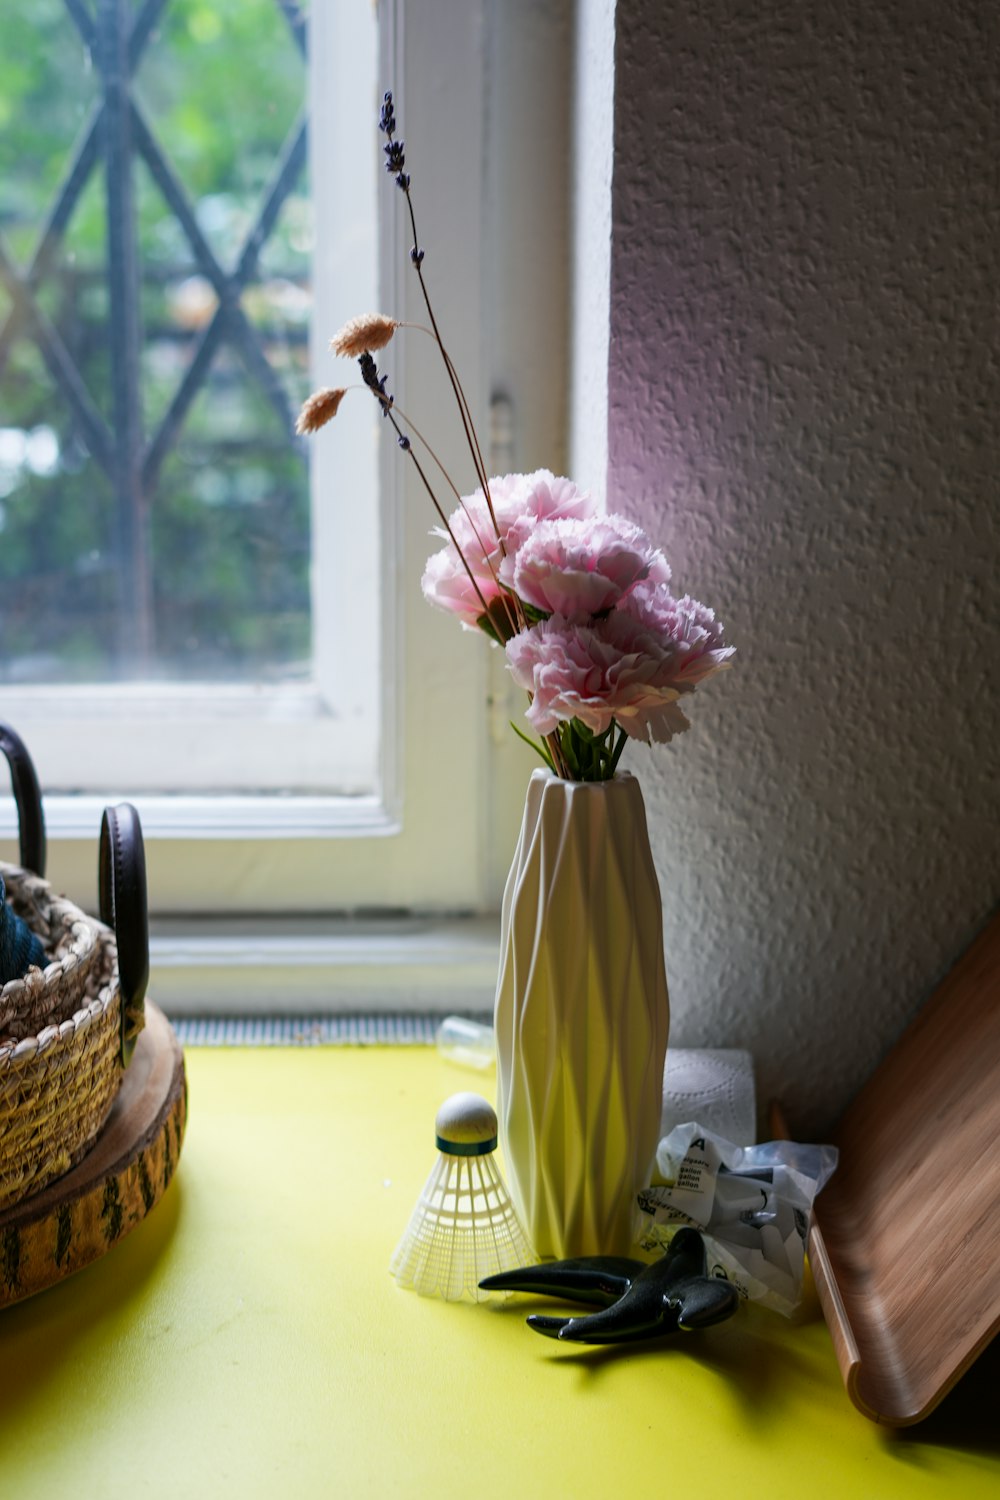 a vase of flowers on a table near a window